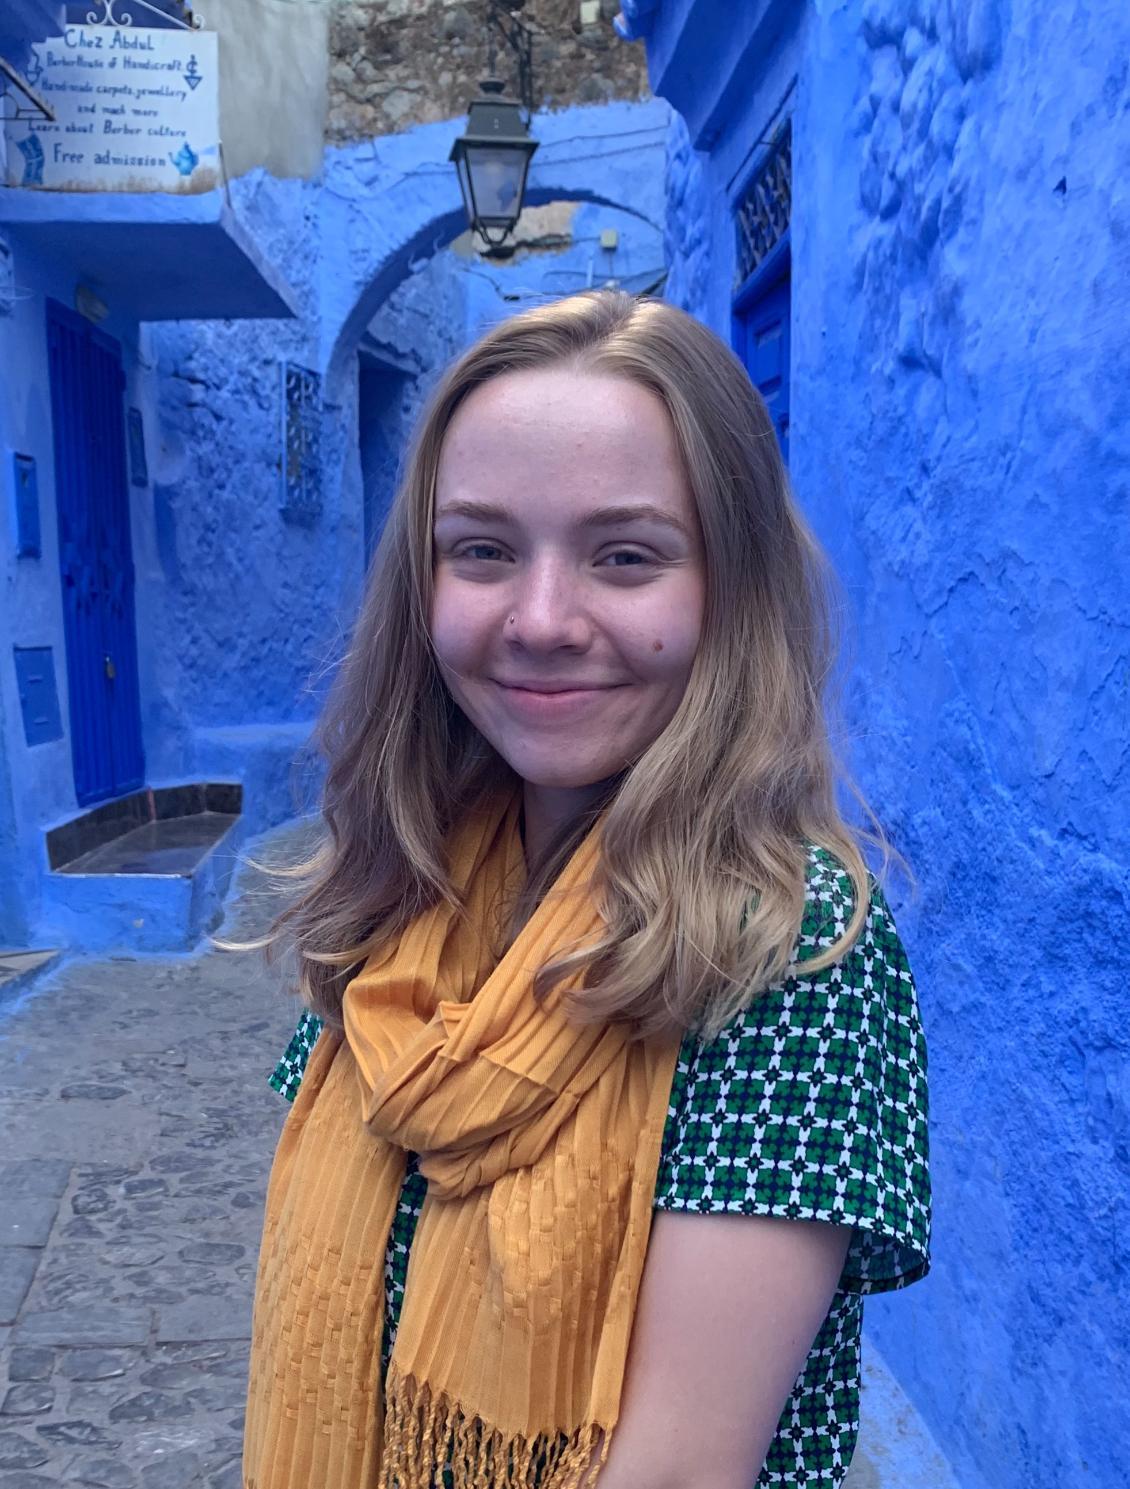 Audrey Akots in Chefchaouen among blue buildings